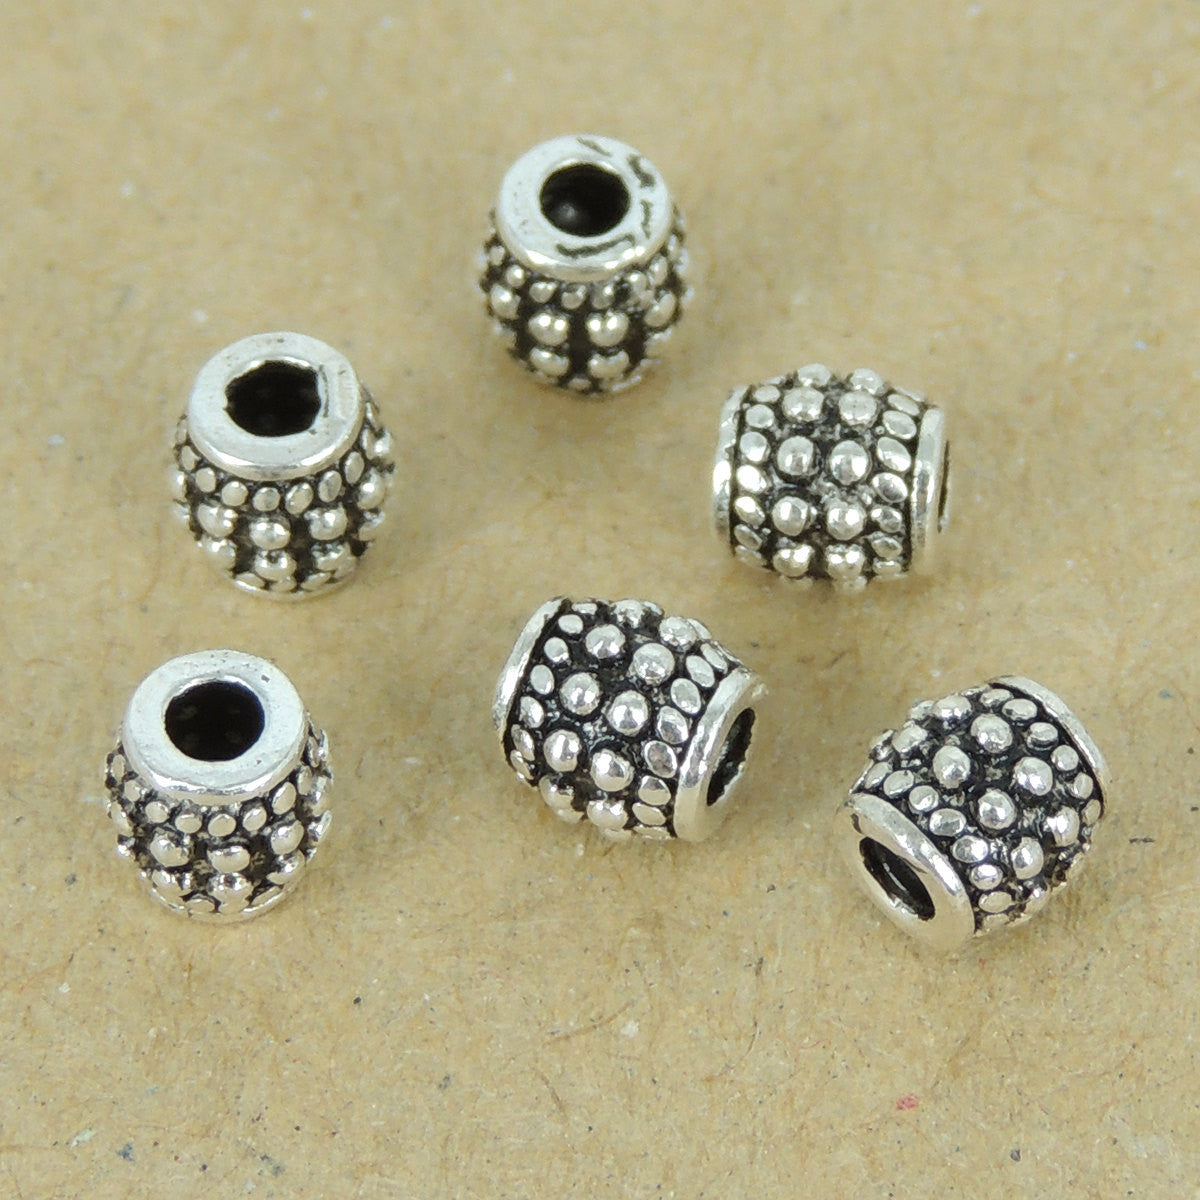 6 PCS Art Deco Inspired Barrel Beads - S925 Sterling Silver WSP406X6